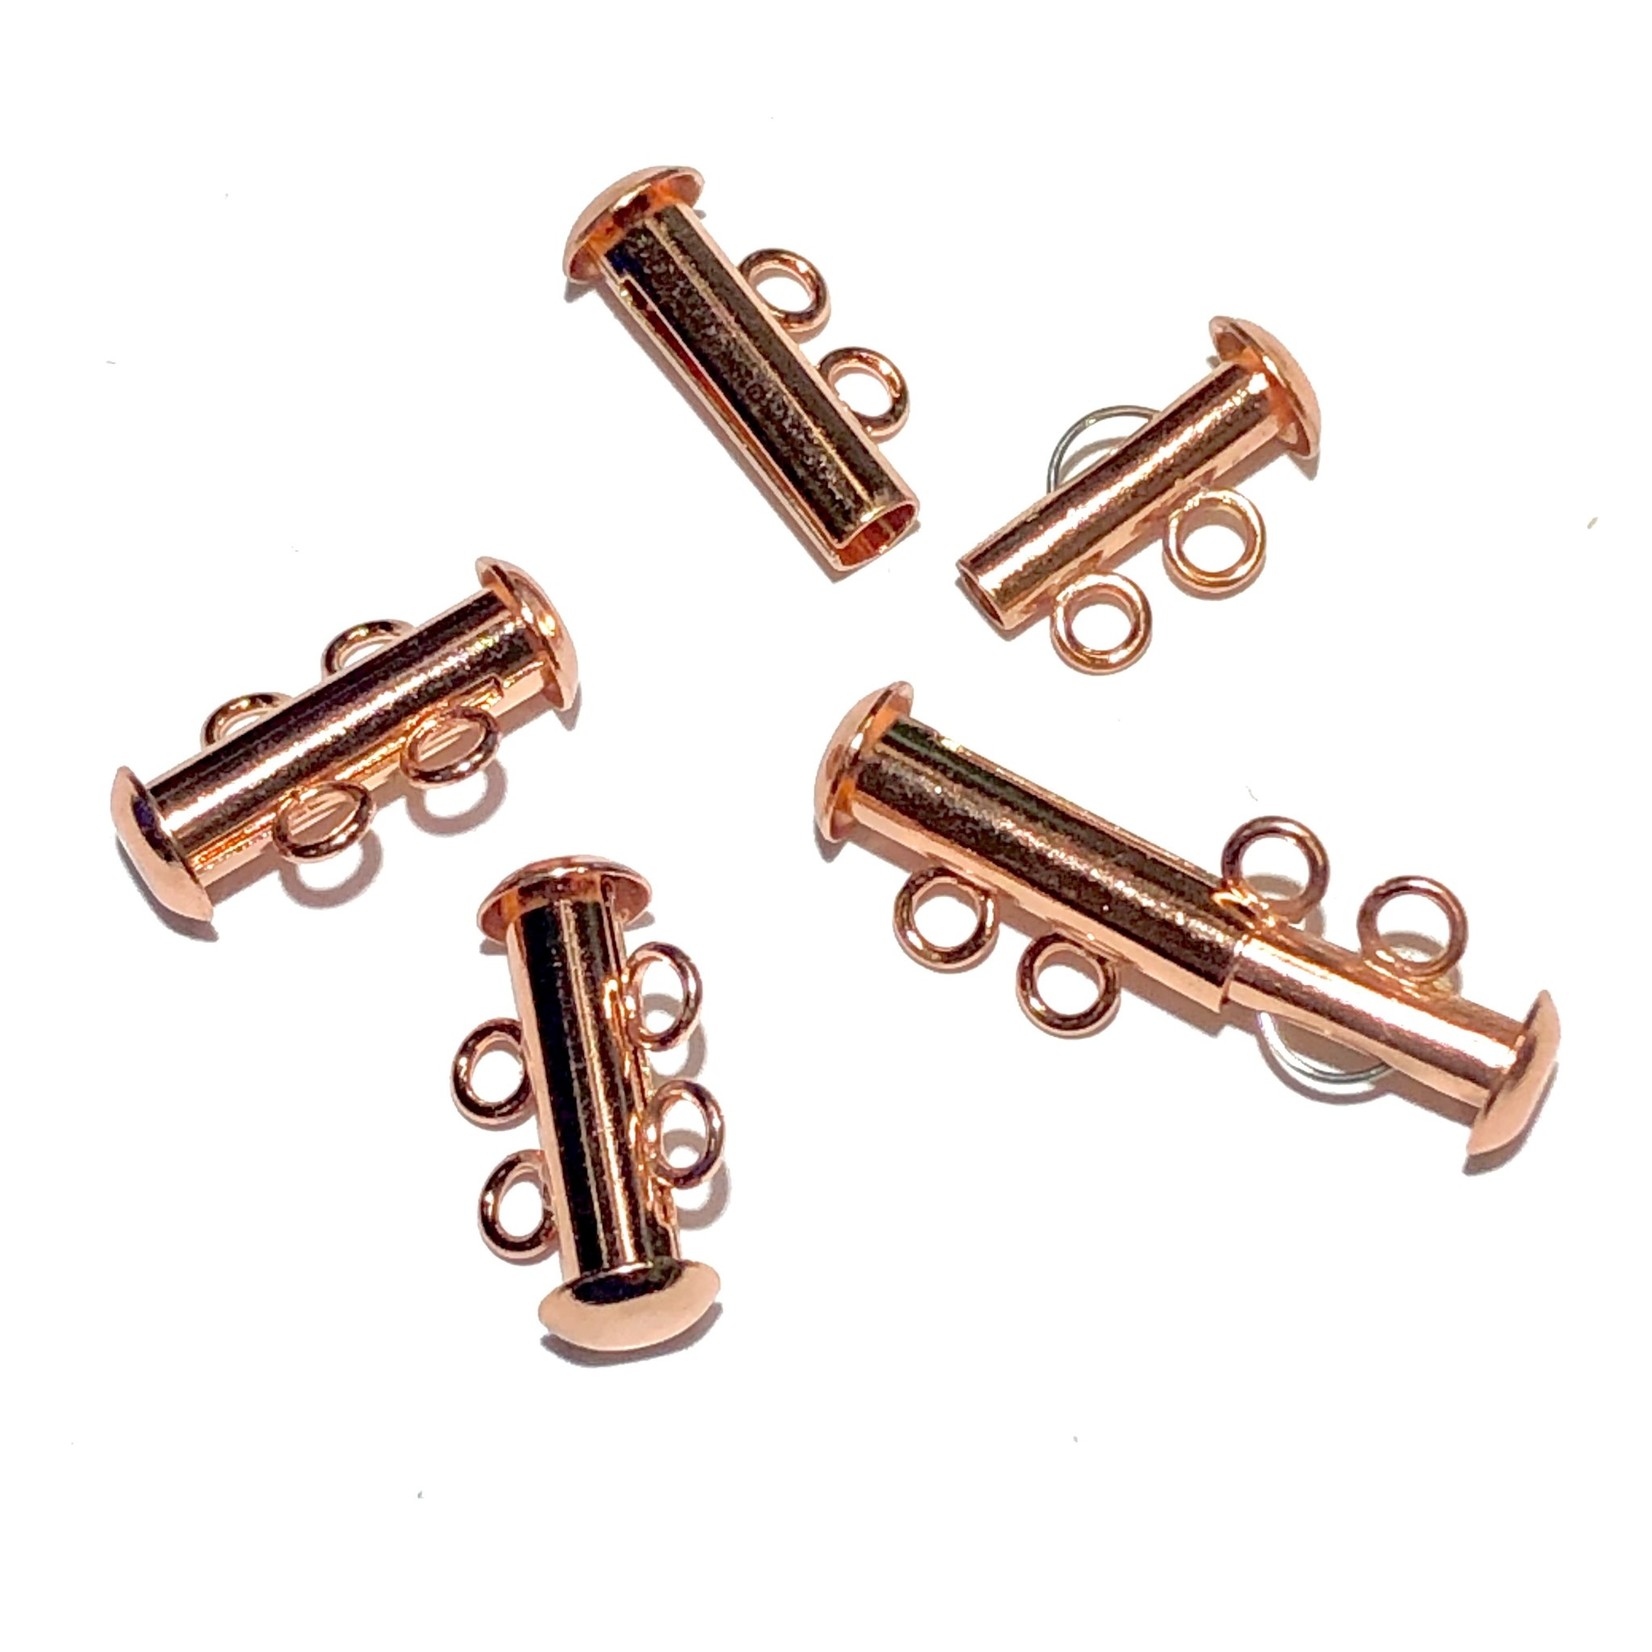 Slide CLASP 2 Hole Bright Copper Plated Brass 4pcs